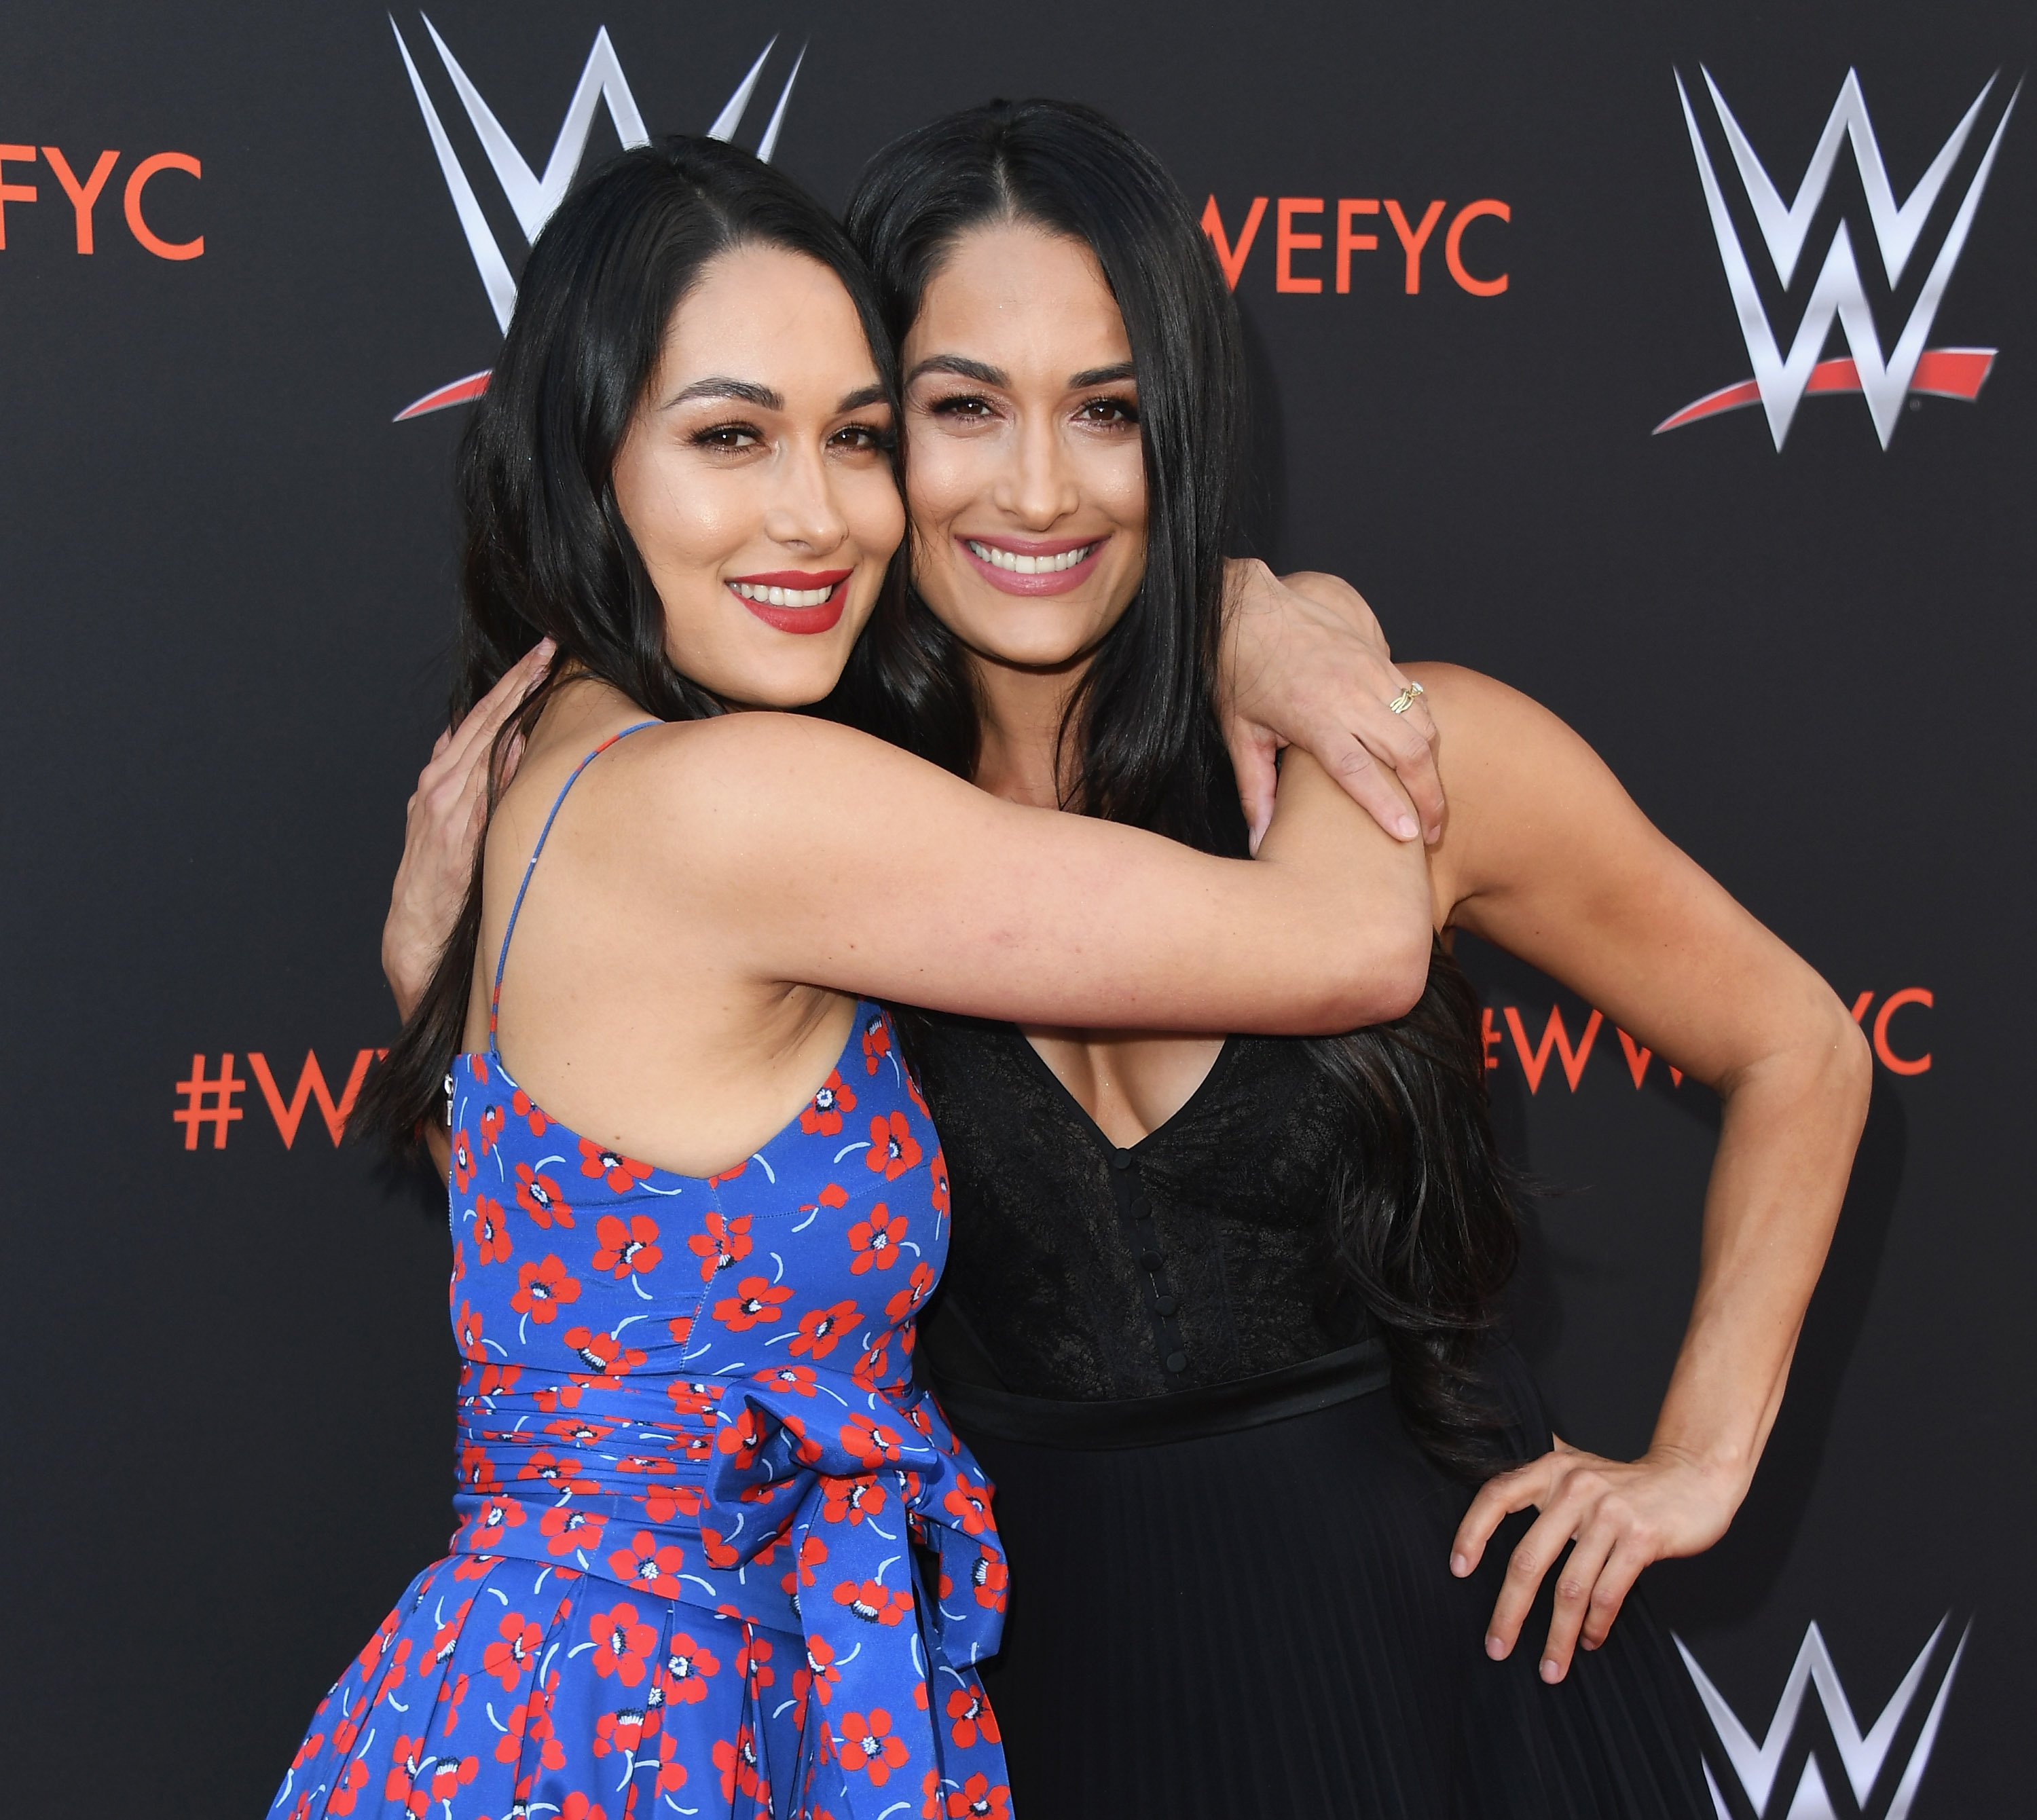 Nikki Bella and Brie Bella during a 2018 WWE event in California. | Photo: Getty Images